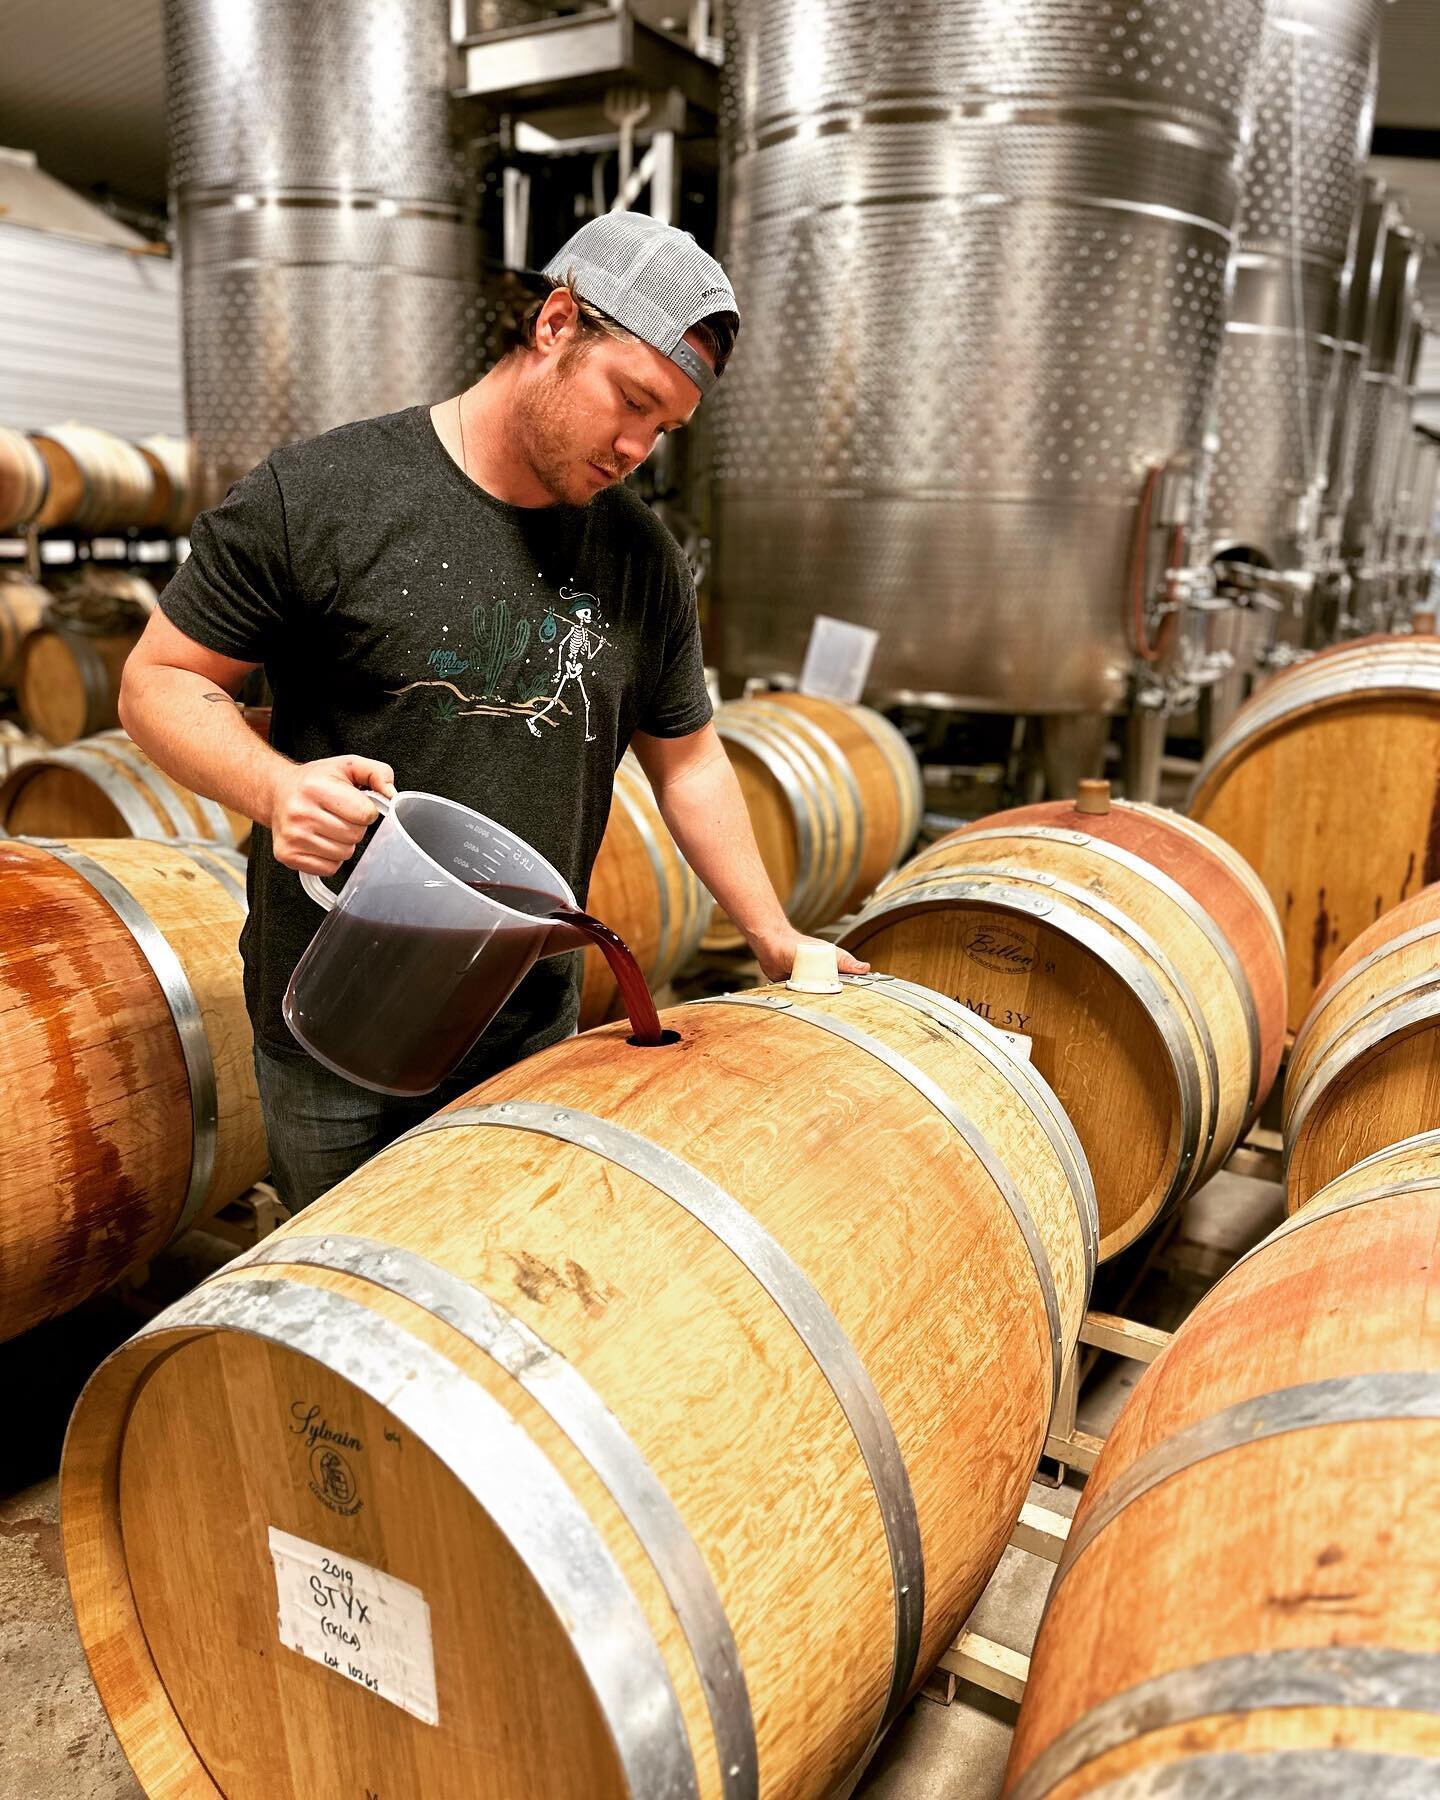 It&rsquo;s not the most glamorous task, but topping barrels is easily one of the most important things we do in the winery. We top our barrels once a month to ensure these wines age without over oxidation. 

This week One Minute Winemaking will go in